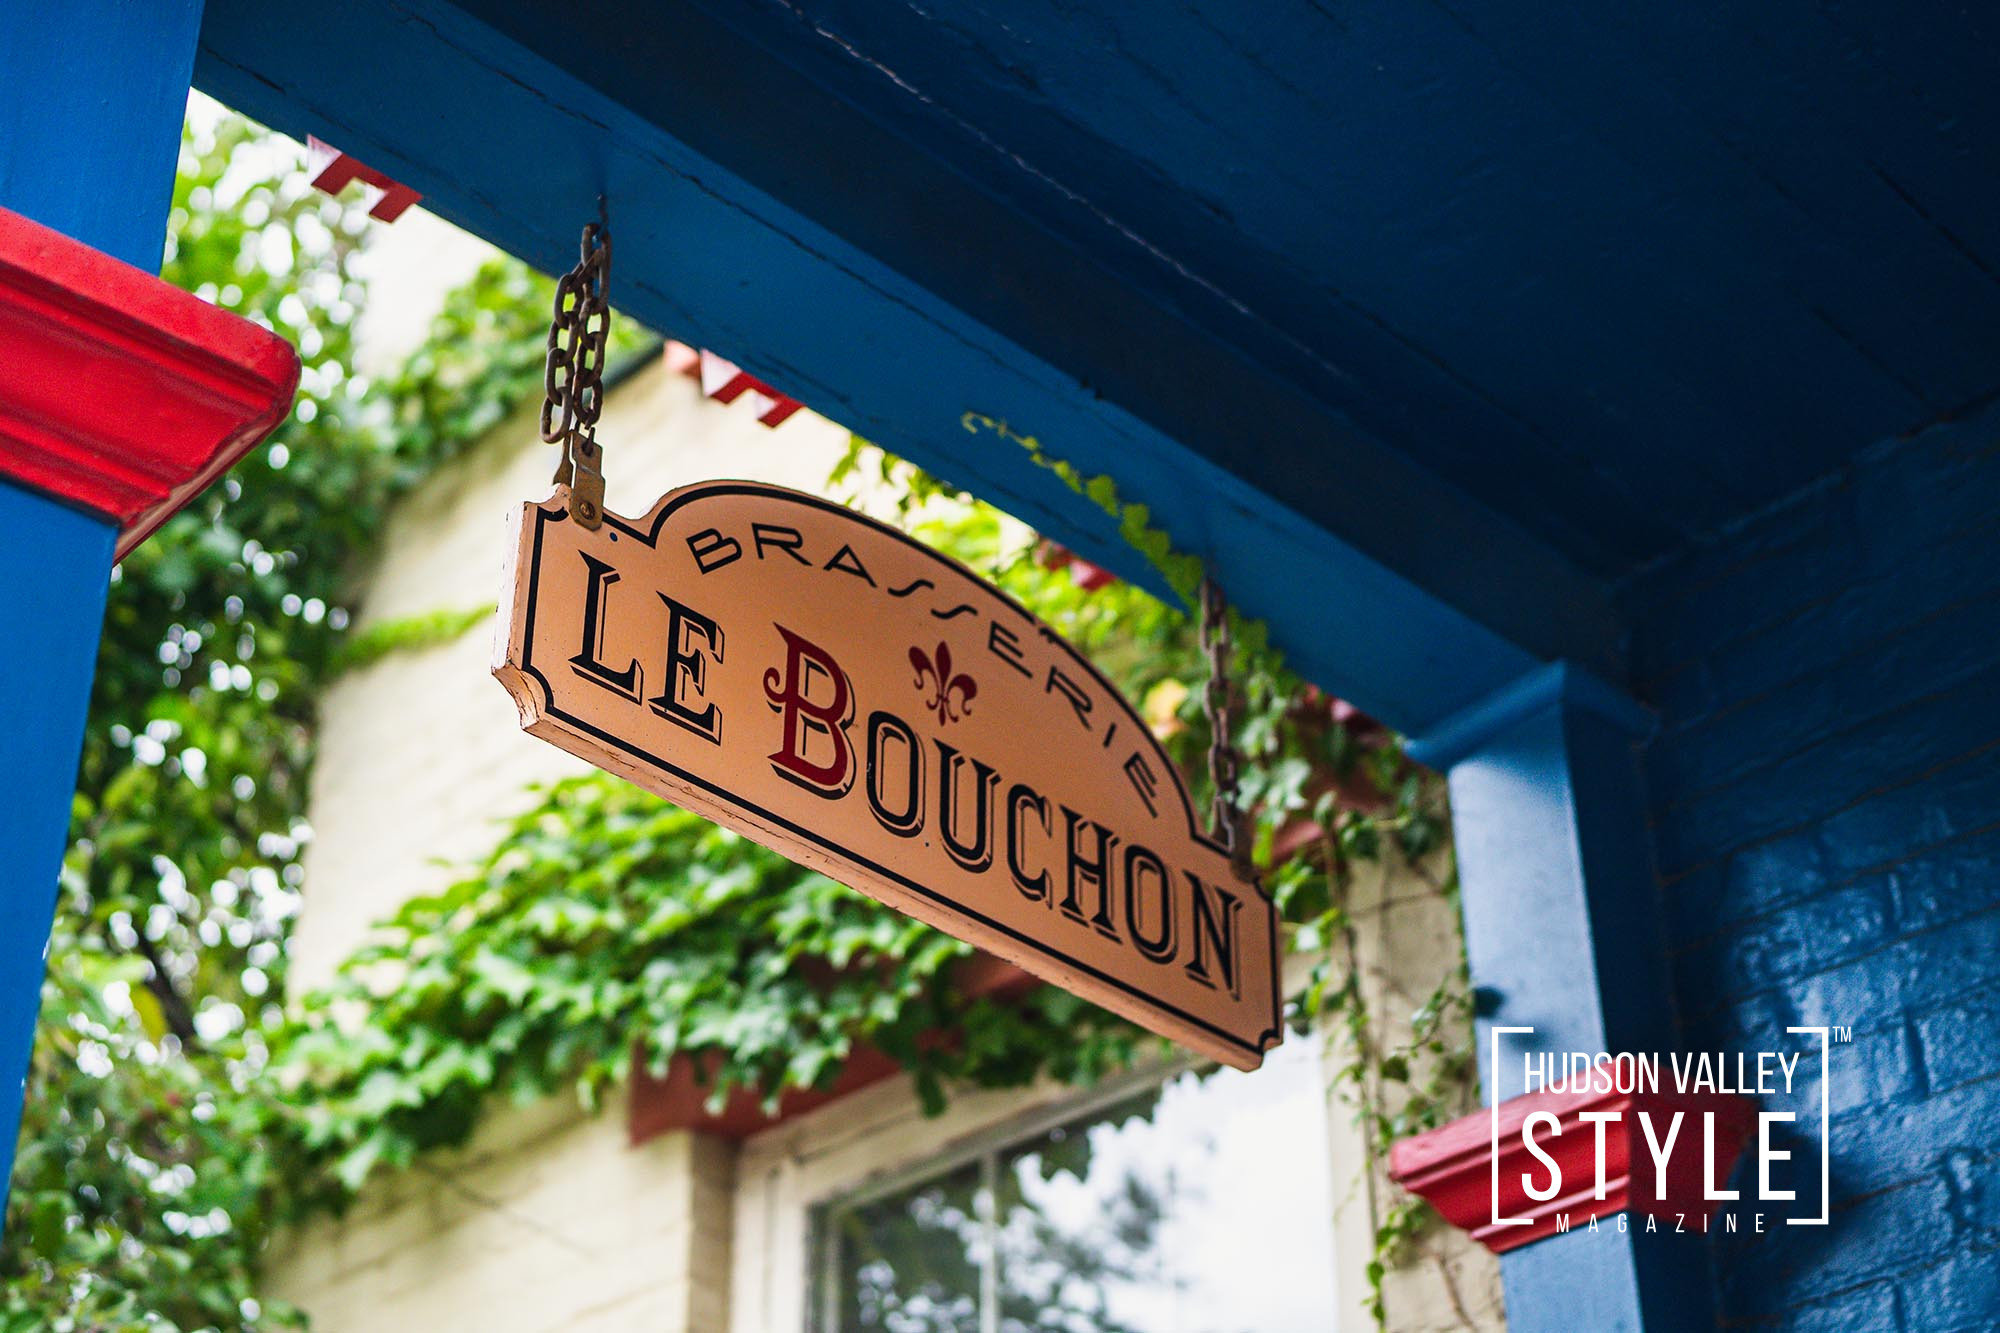 A Toast to Le Bouchon: Exquisite Parisian Charm in the Heart of the Hudson Valley – Cold Spring, NY Restaurant Reviews with Maxwell Alexander